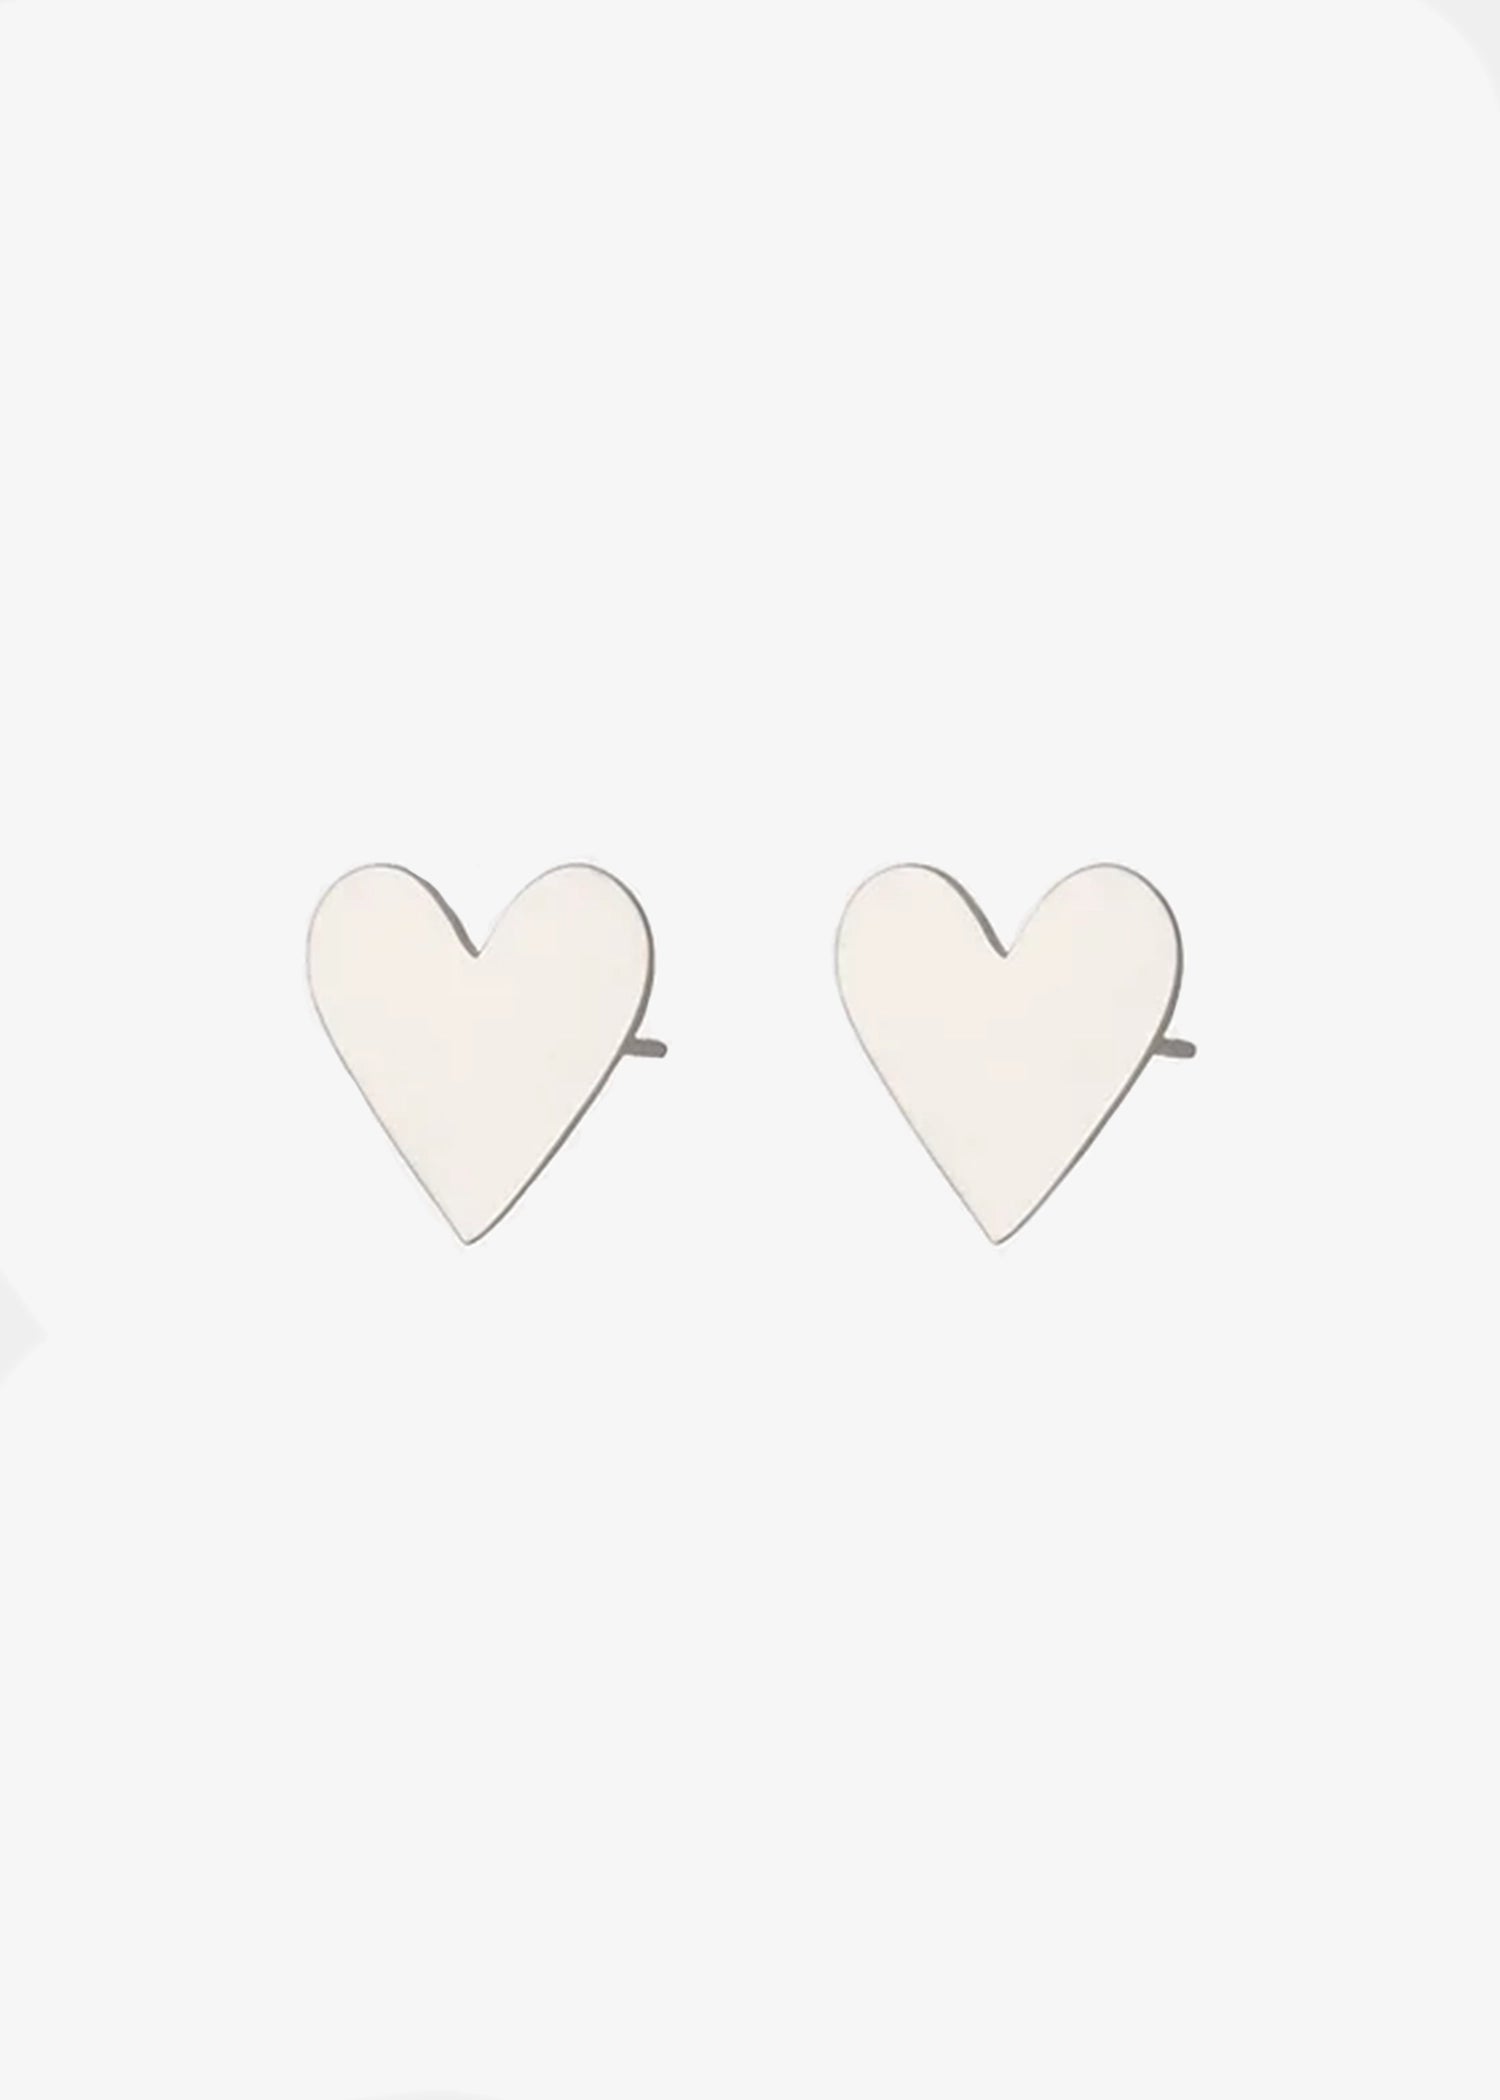 Asia-Ingalls-Small-Heart-Studs-Silver